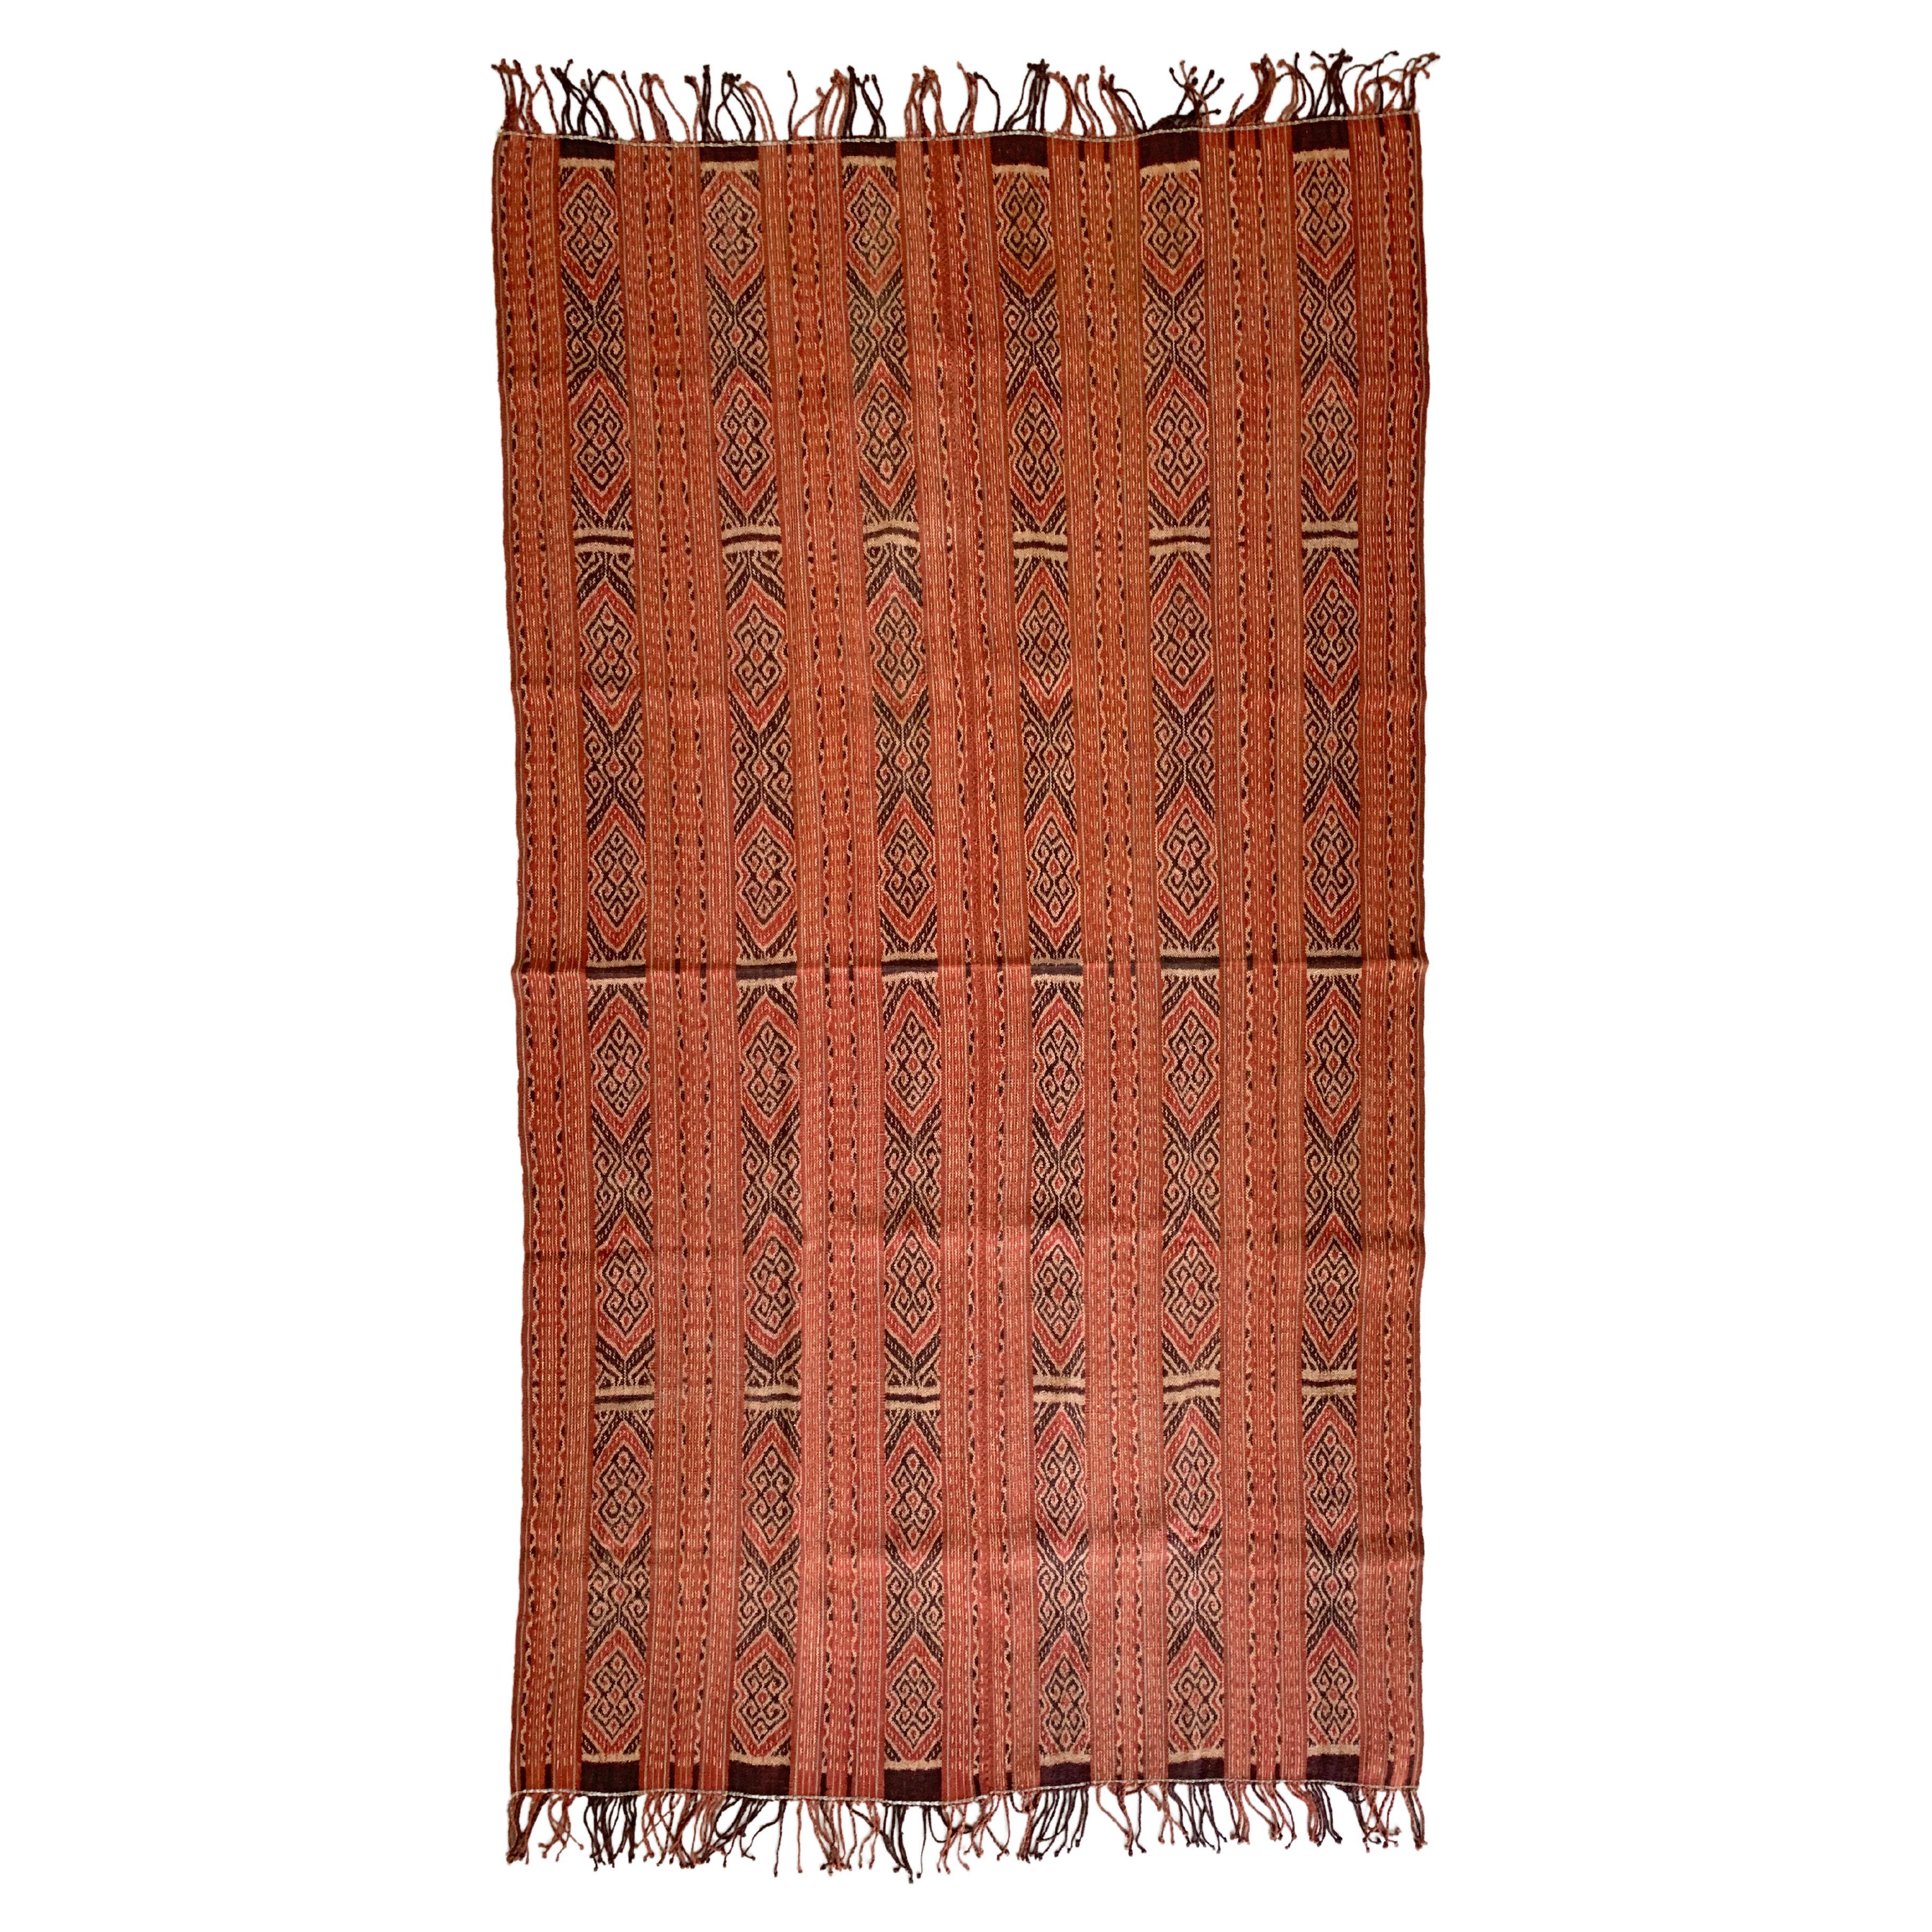 Ikat Textile from Timor Island, Indonesia For Sale